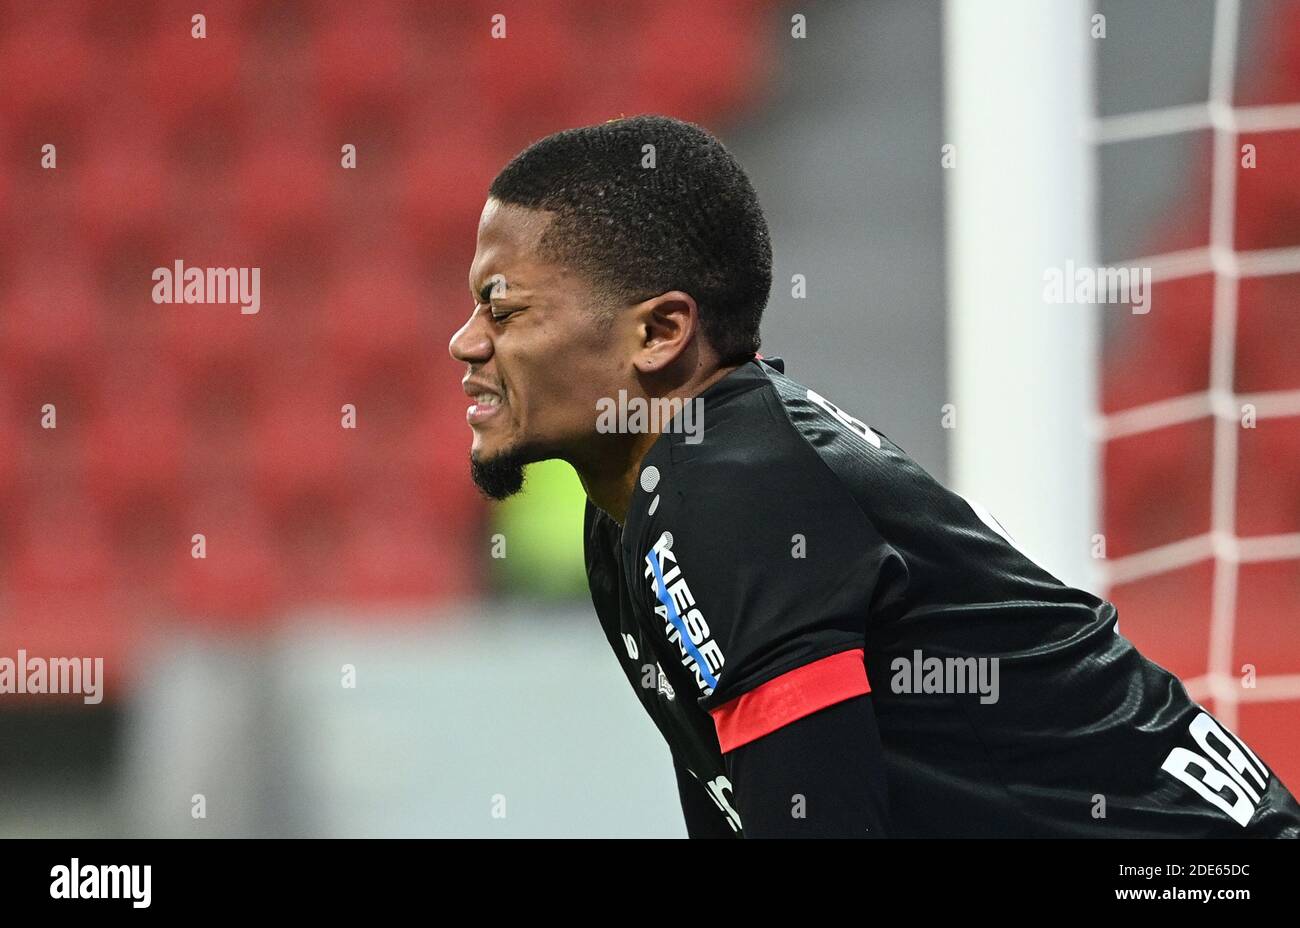 Leverkusen, Germany. 29th Nov, 2020. Football: Bundesliga, Bayer Leverkusen  - Hertha BSC, 9th matchday in the BayArena. Leverkusen's Leon Bailey reacts  during the game. Credit: Ina Fassbender/AFP Pool/dpa - IMPORTANT NOTE: In